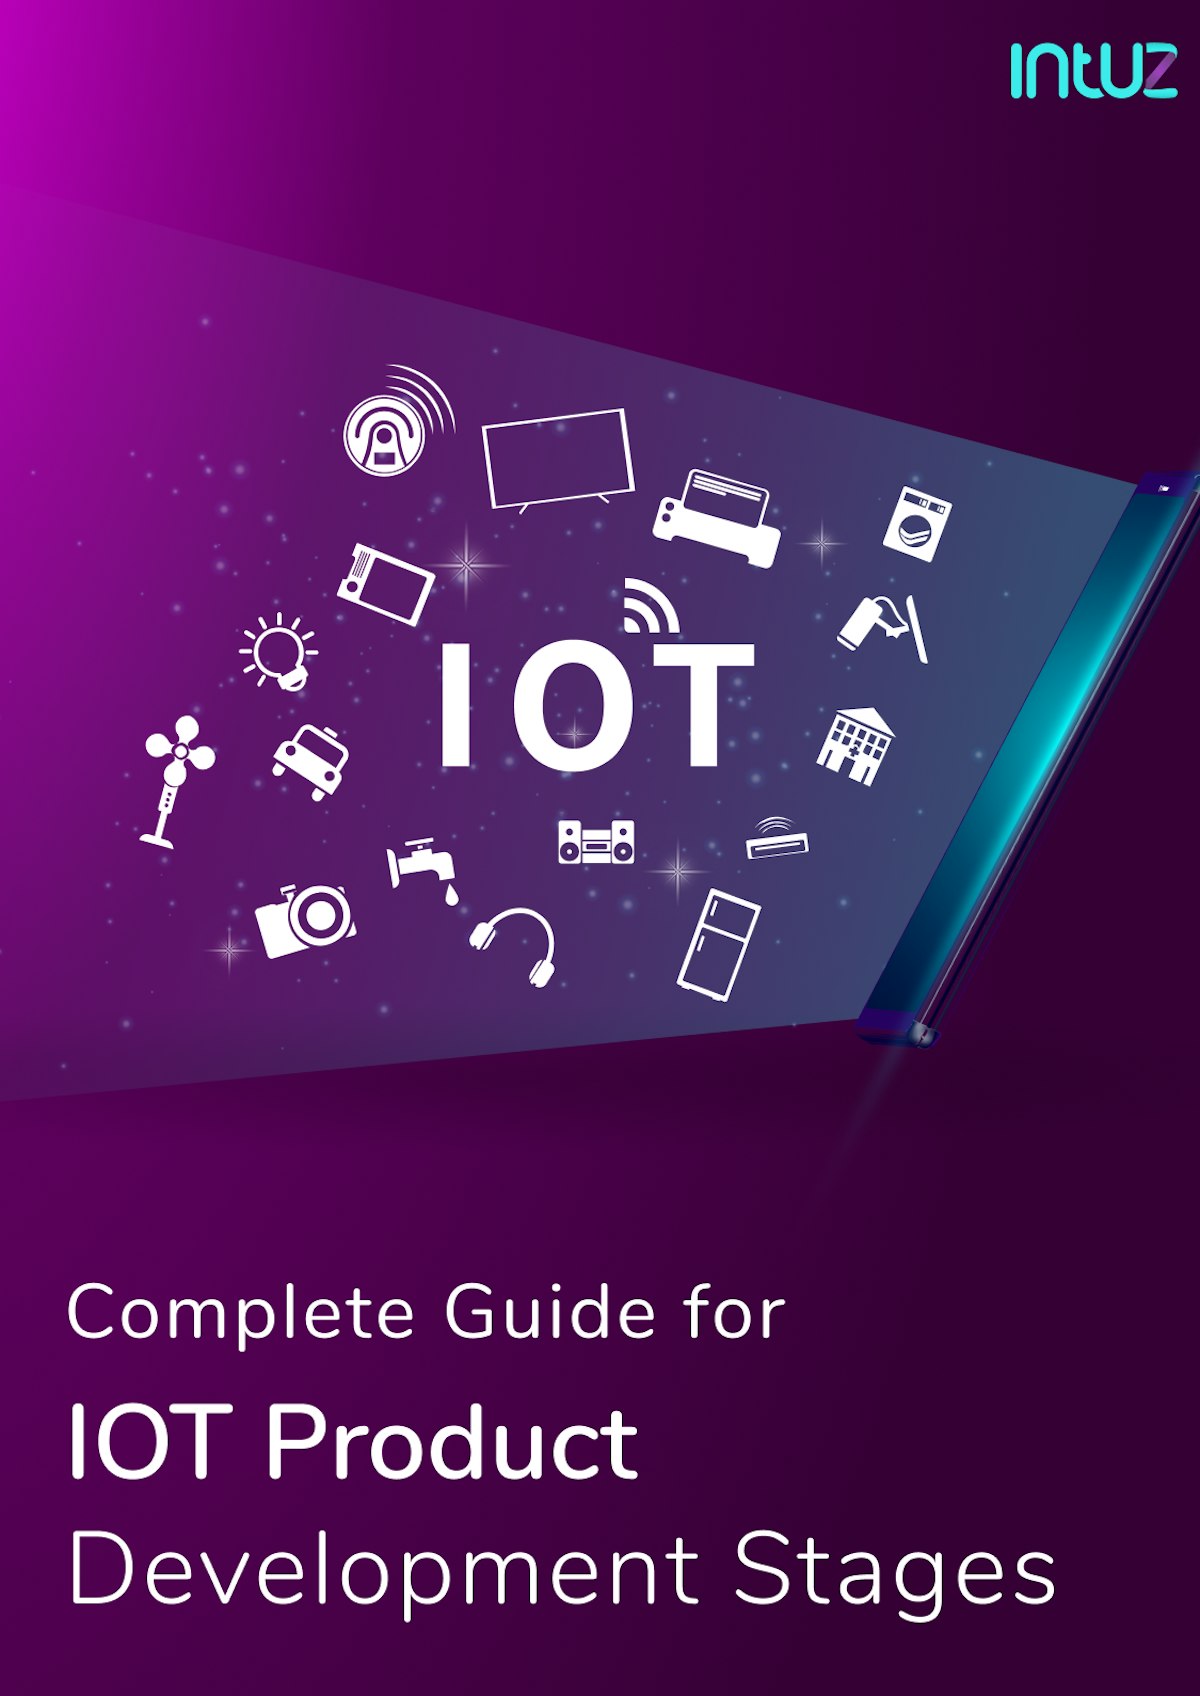 Guide - IoT Product Development Stages